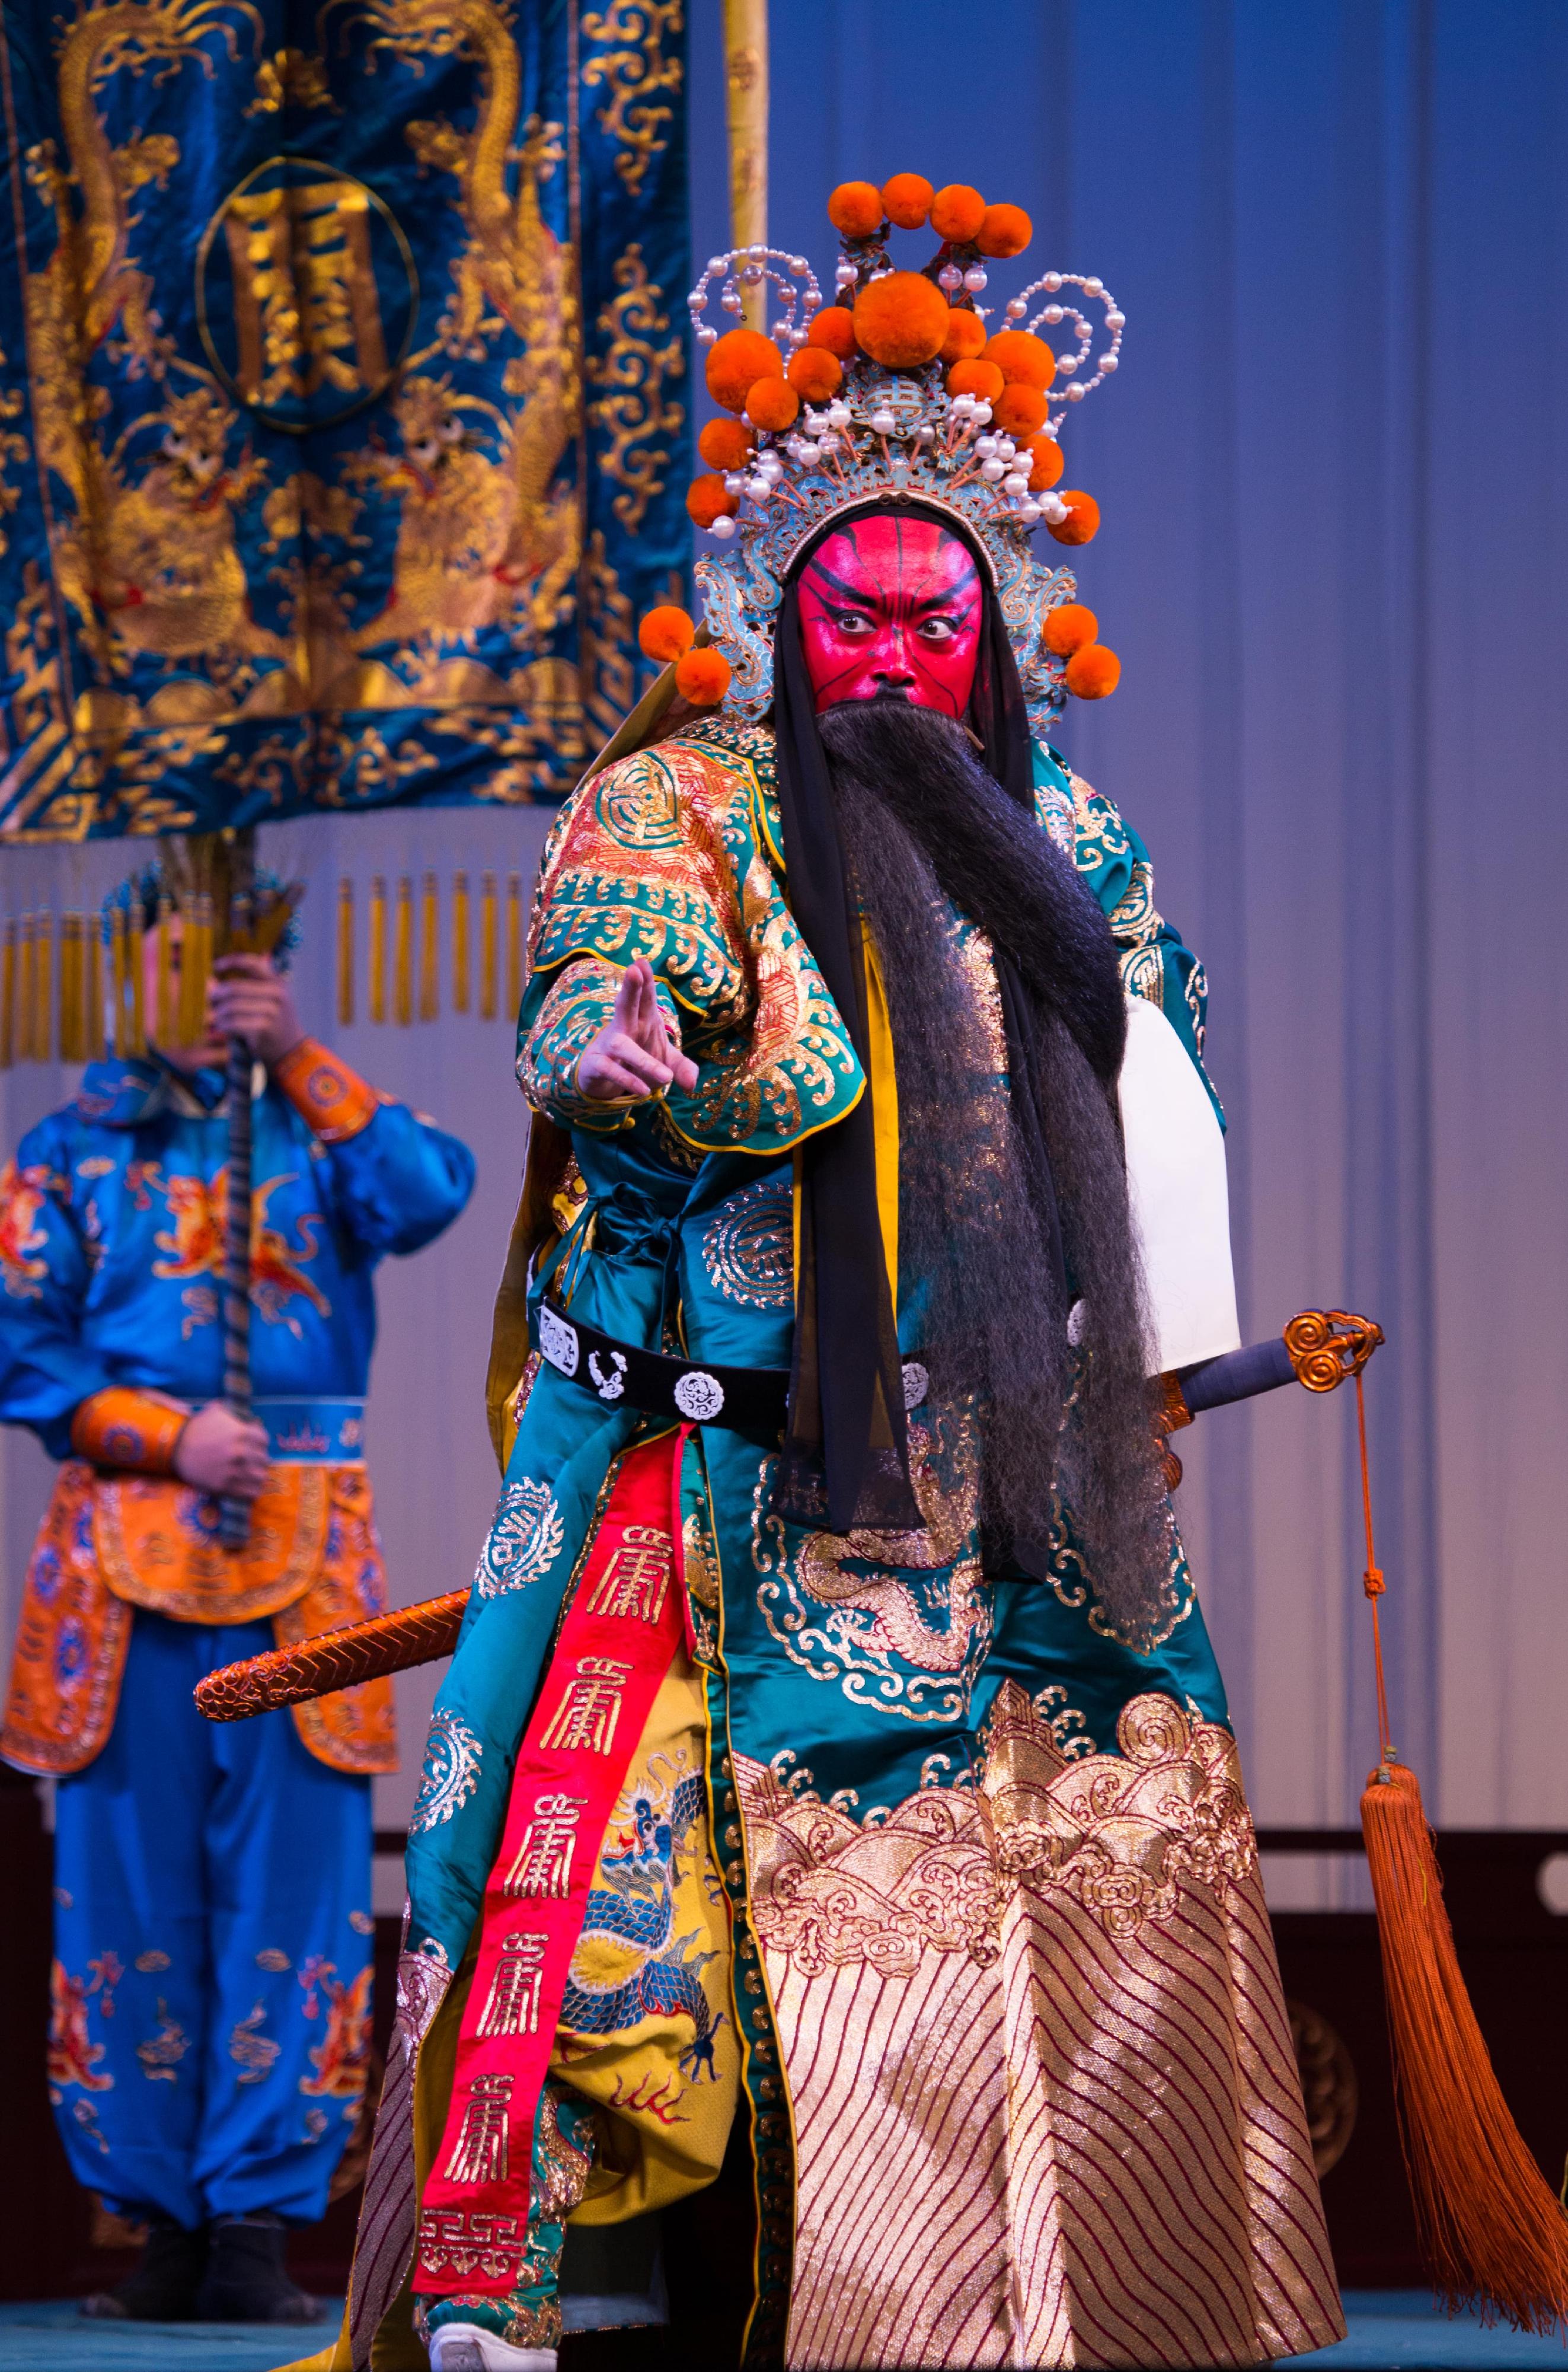 The inaugural Chinese Culture Festival will stage three classic Northern Kunqu opera plays in July. Photo shows a scene from the performance "The Sword Banquet Trap" from "To the Banquet Armed".
